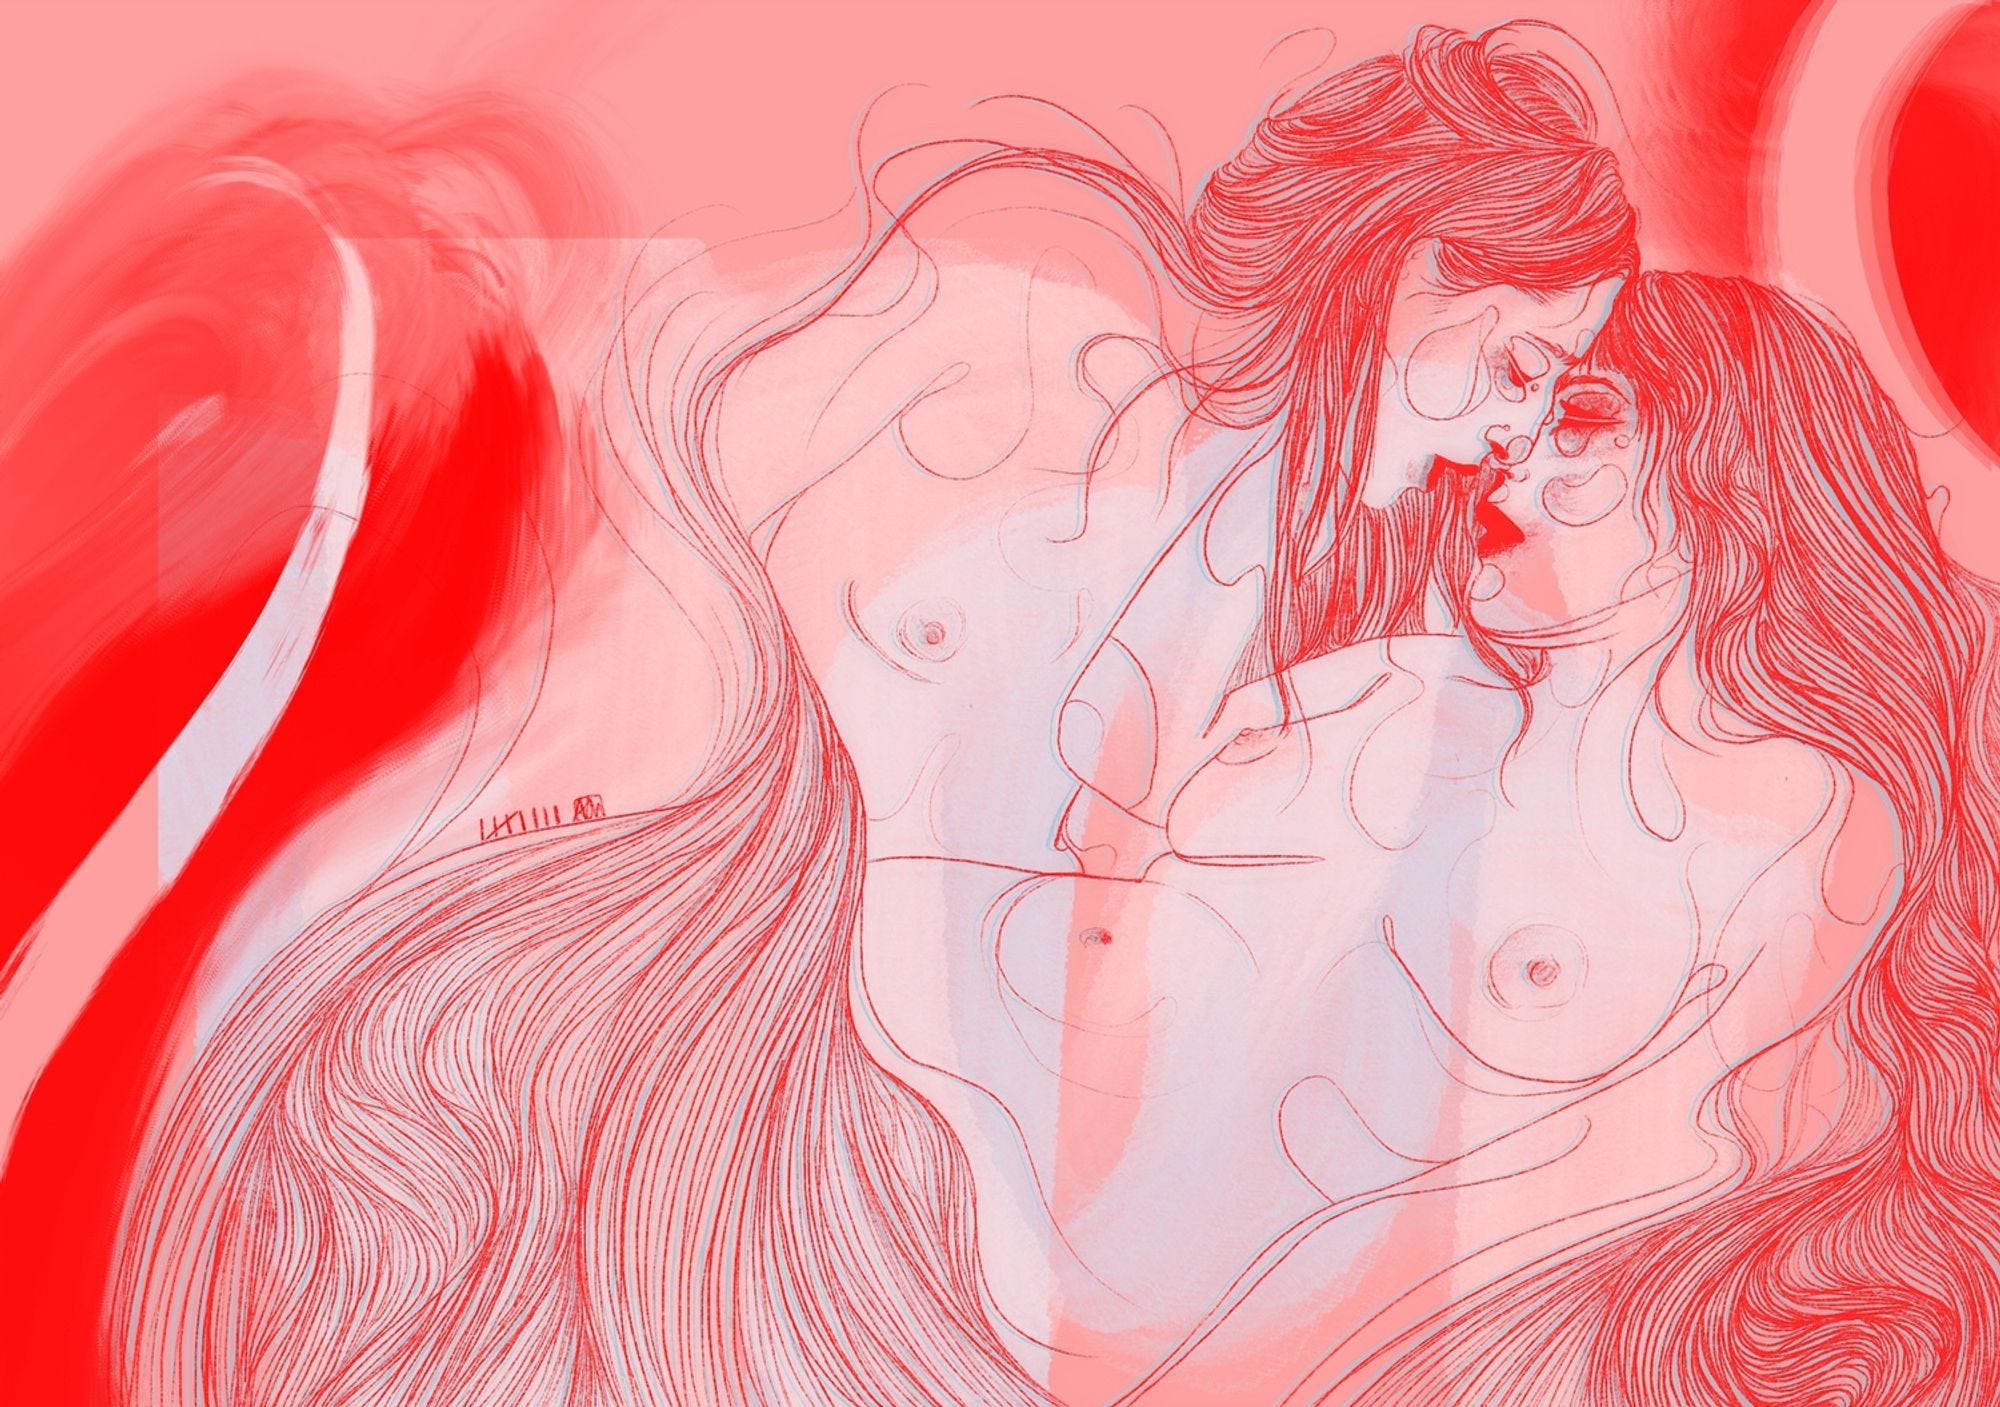 a red line drawing of a nude couple entwined in long hair. the background is pink and pale blue with big red brush strokes to the sides